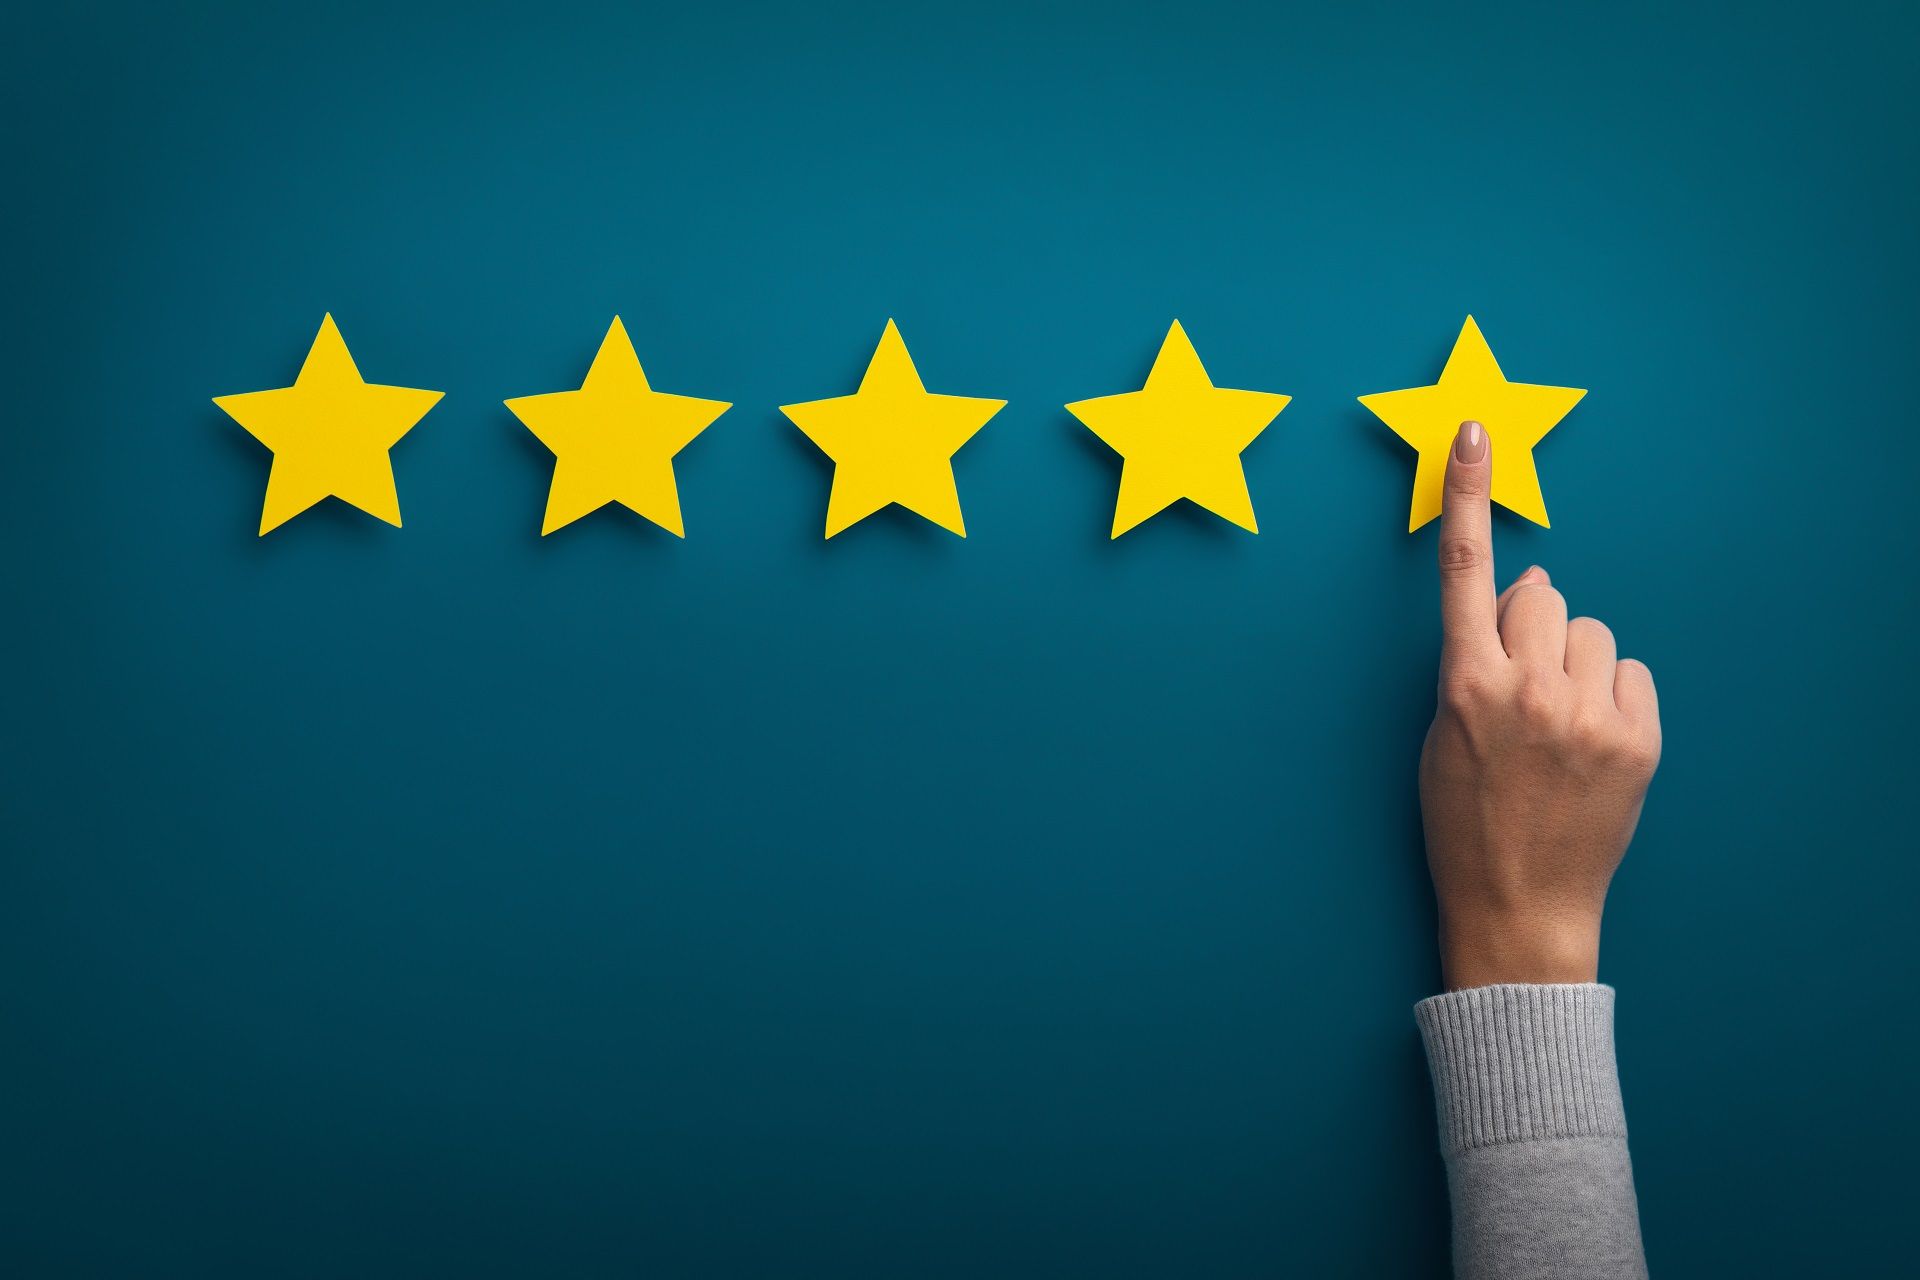 rating products from one to five stars generates